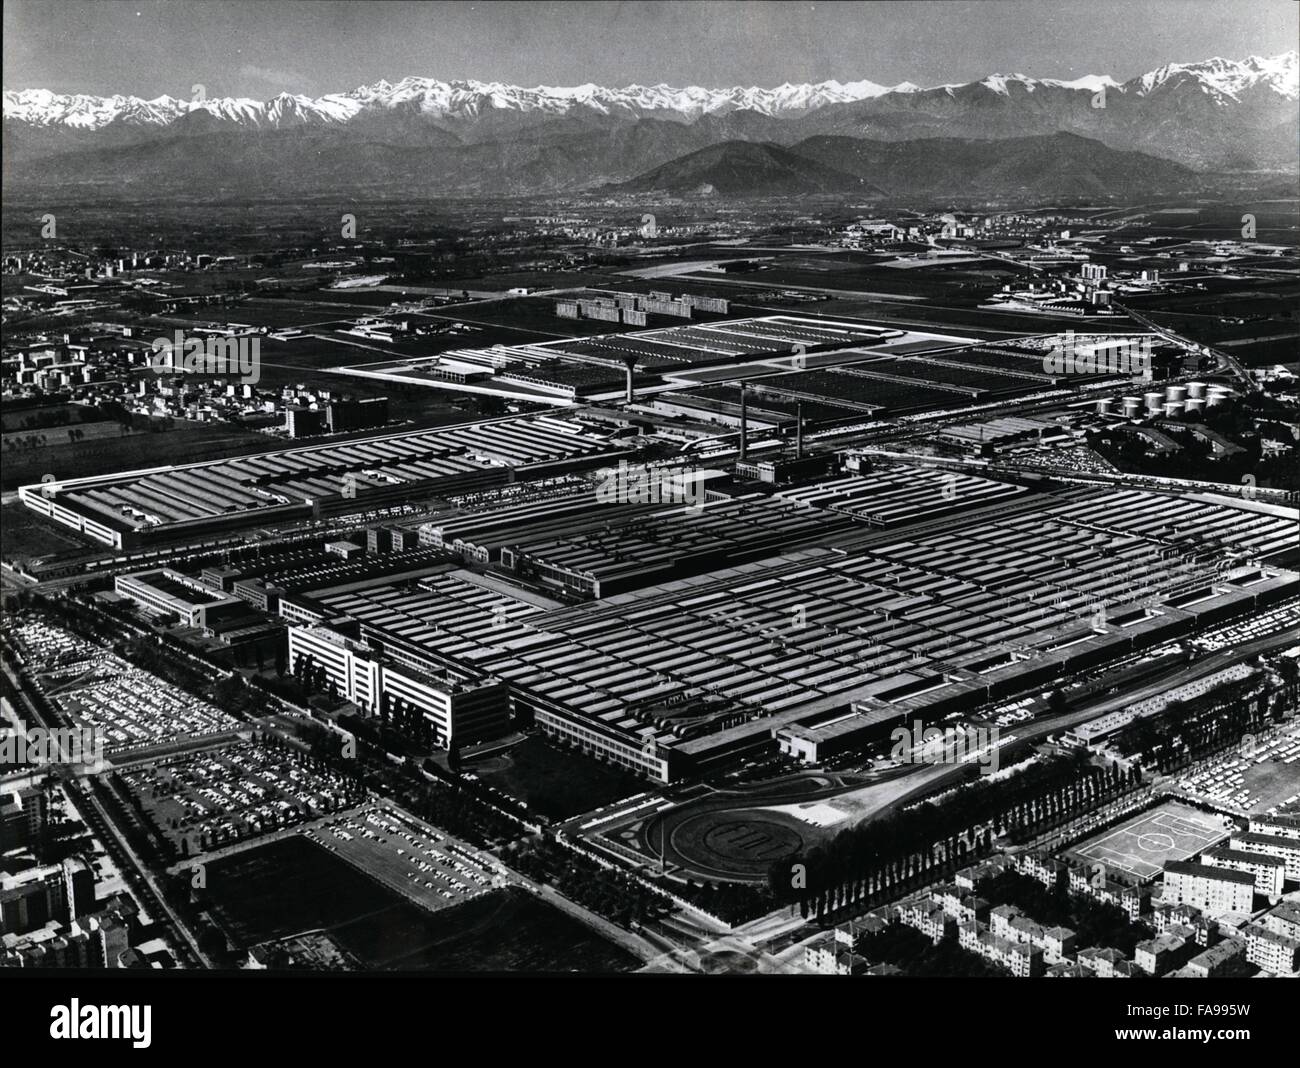 1972 - Fiat ''Mirafiori'' car complex in Turin with snow capped Alps as a backdrop. © Keystone Pictures USA/ZUMAPRESS.com/Alamy Live News Stock Photo